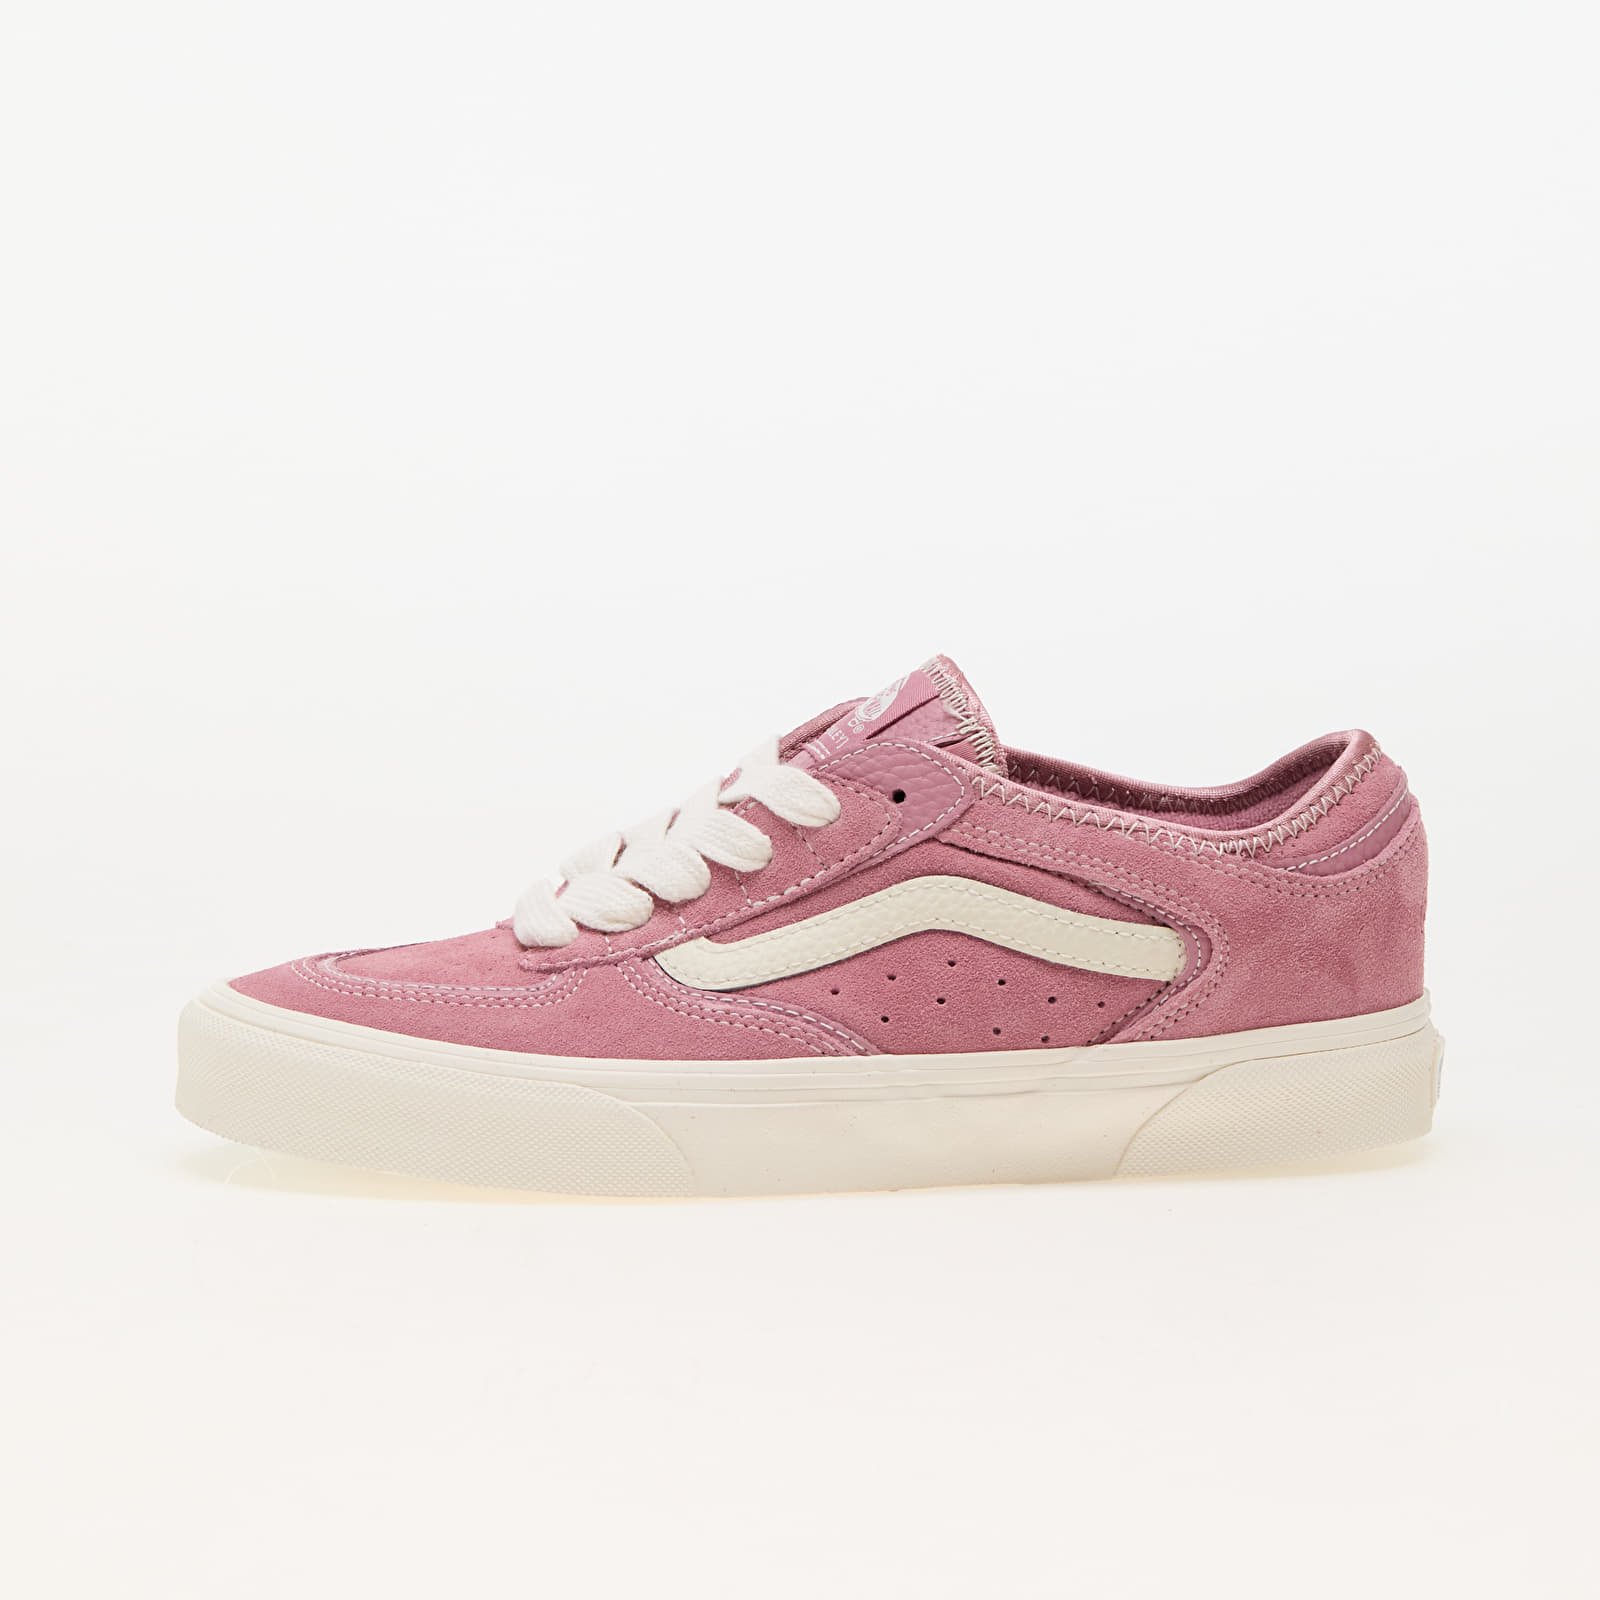 Rowley Classic Pink, Low-top sneakers